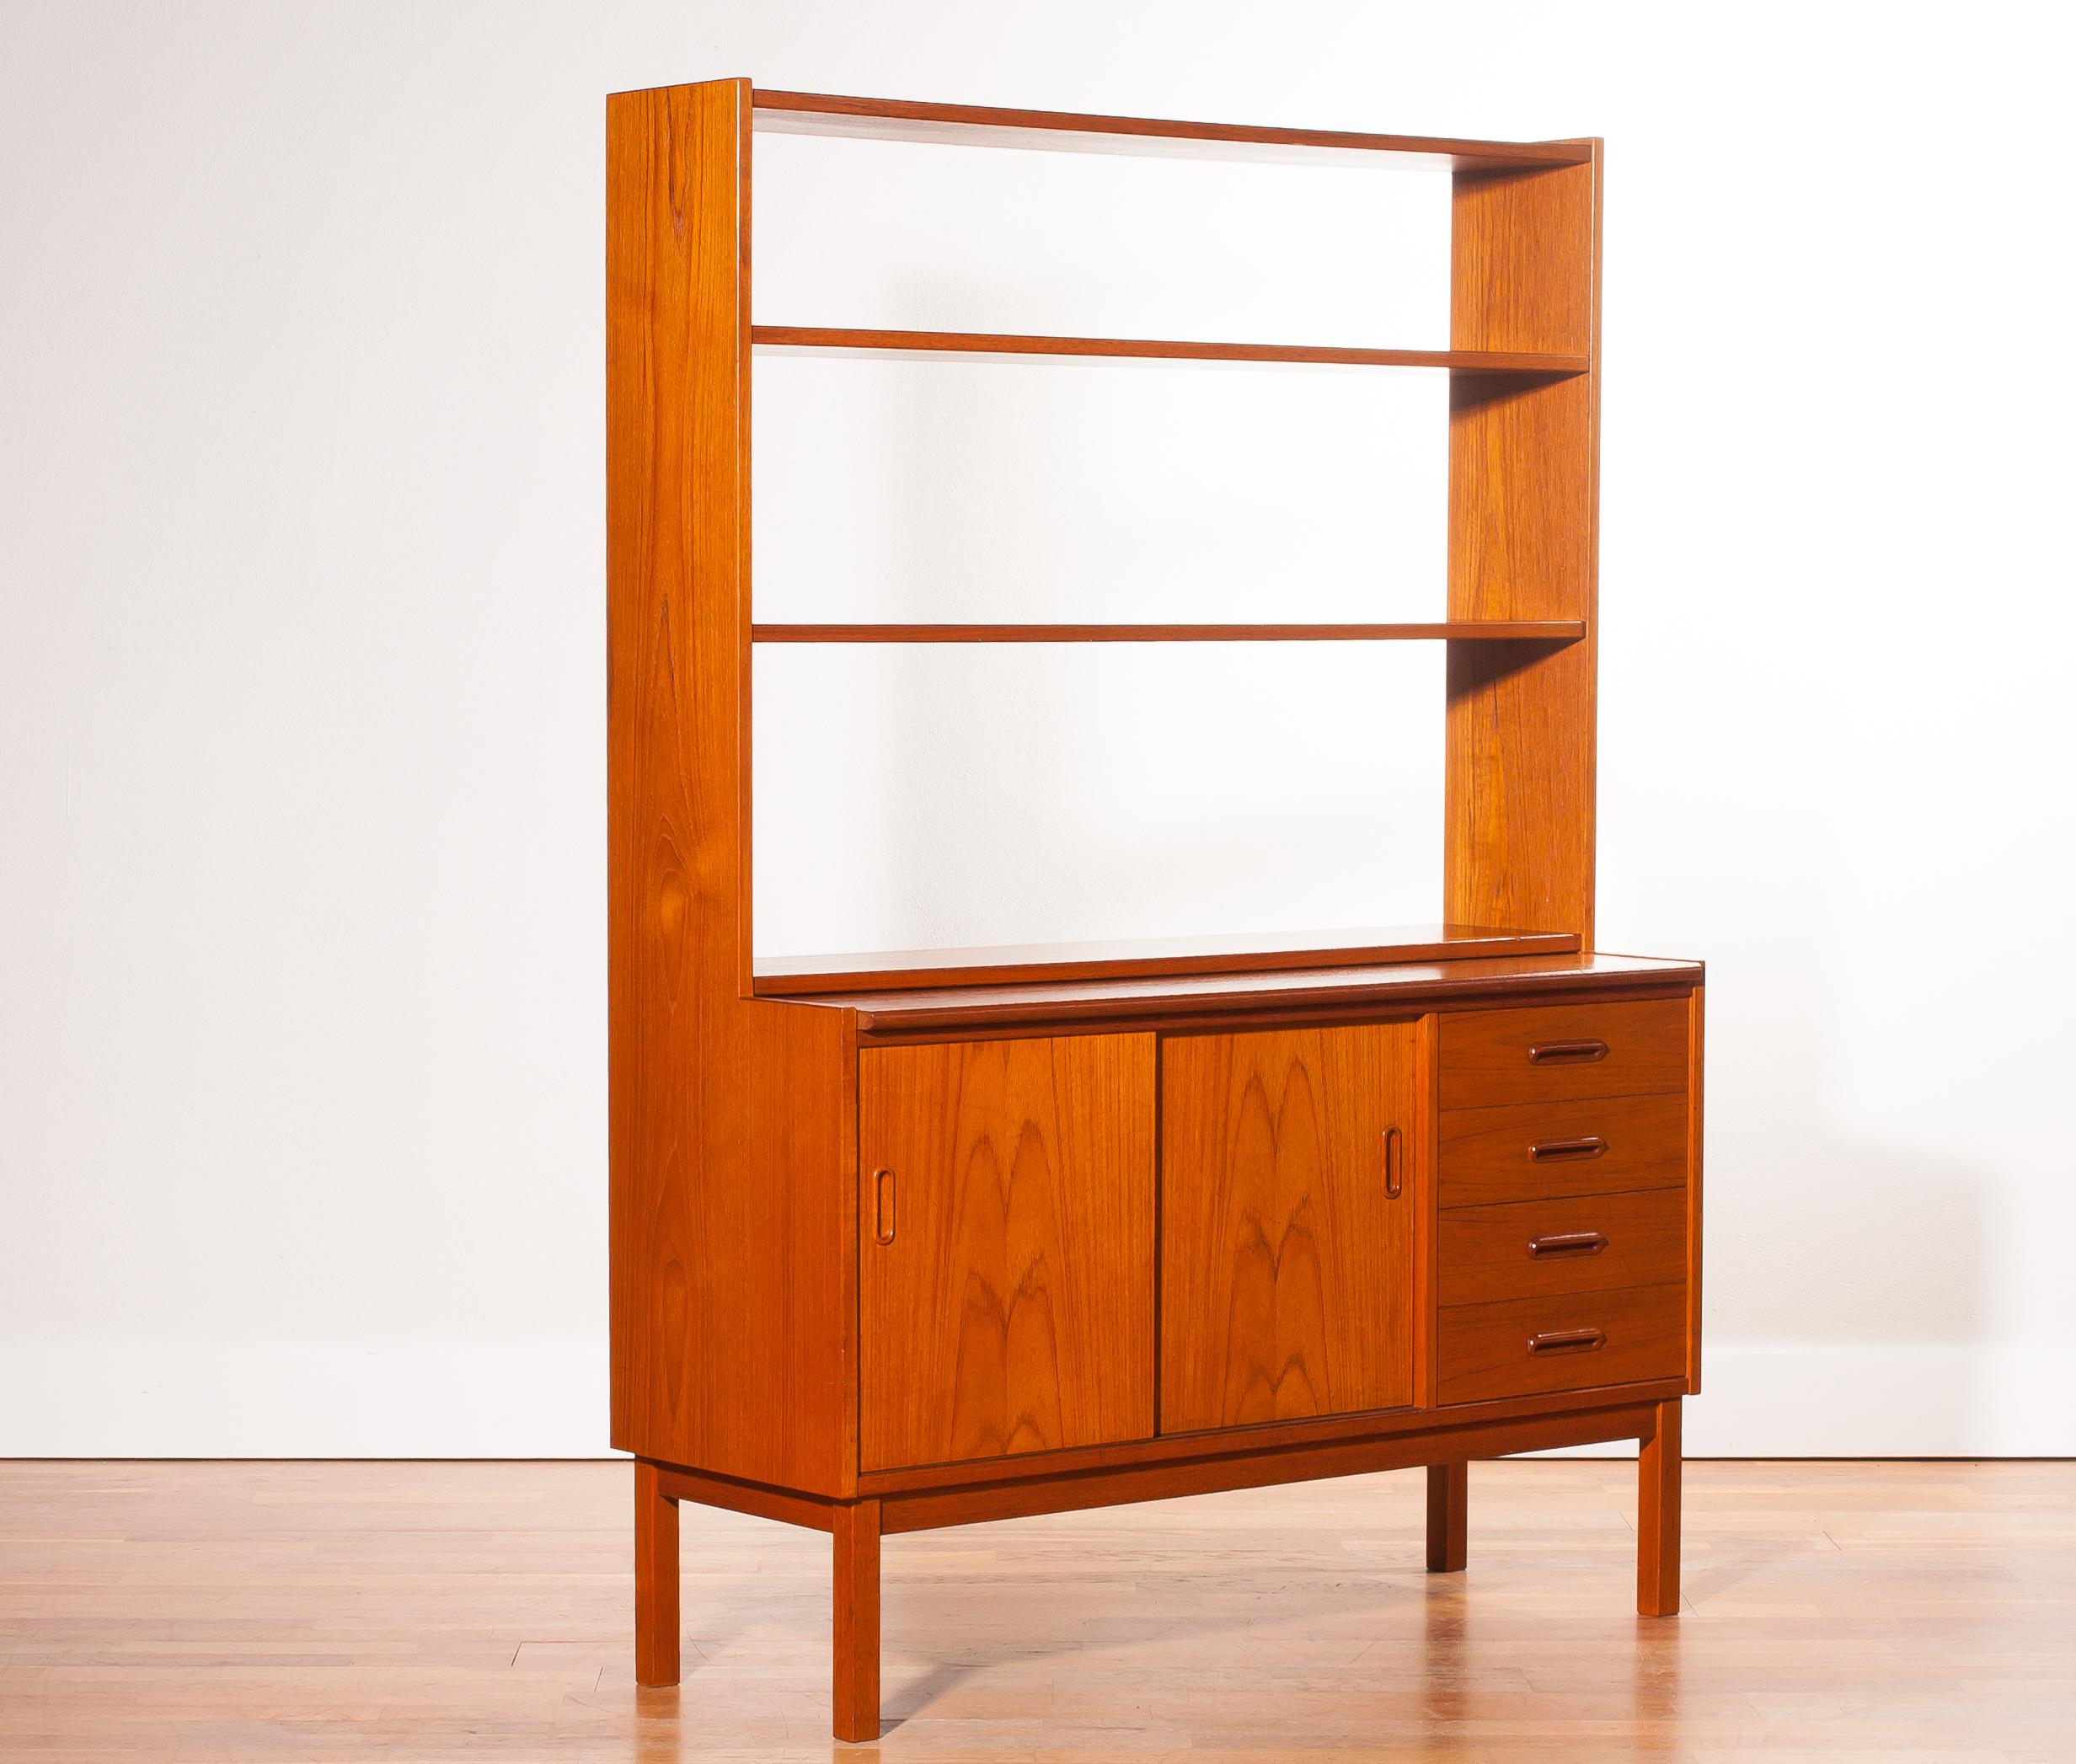 1960s, Teak Book Case with Slidable Writing or Working Space from Sweden 2